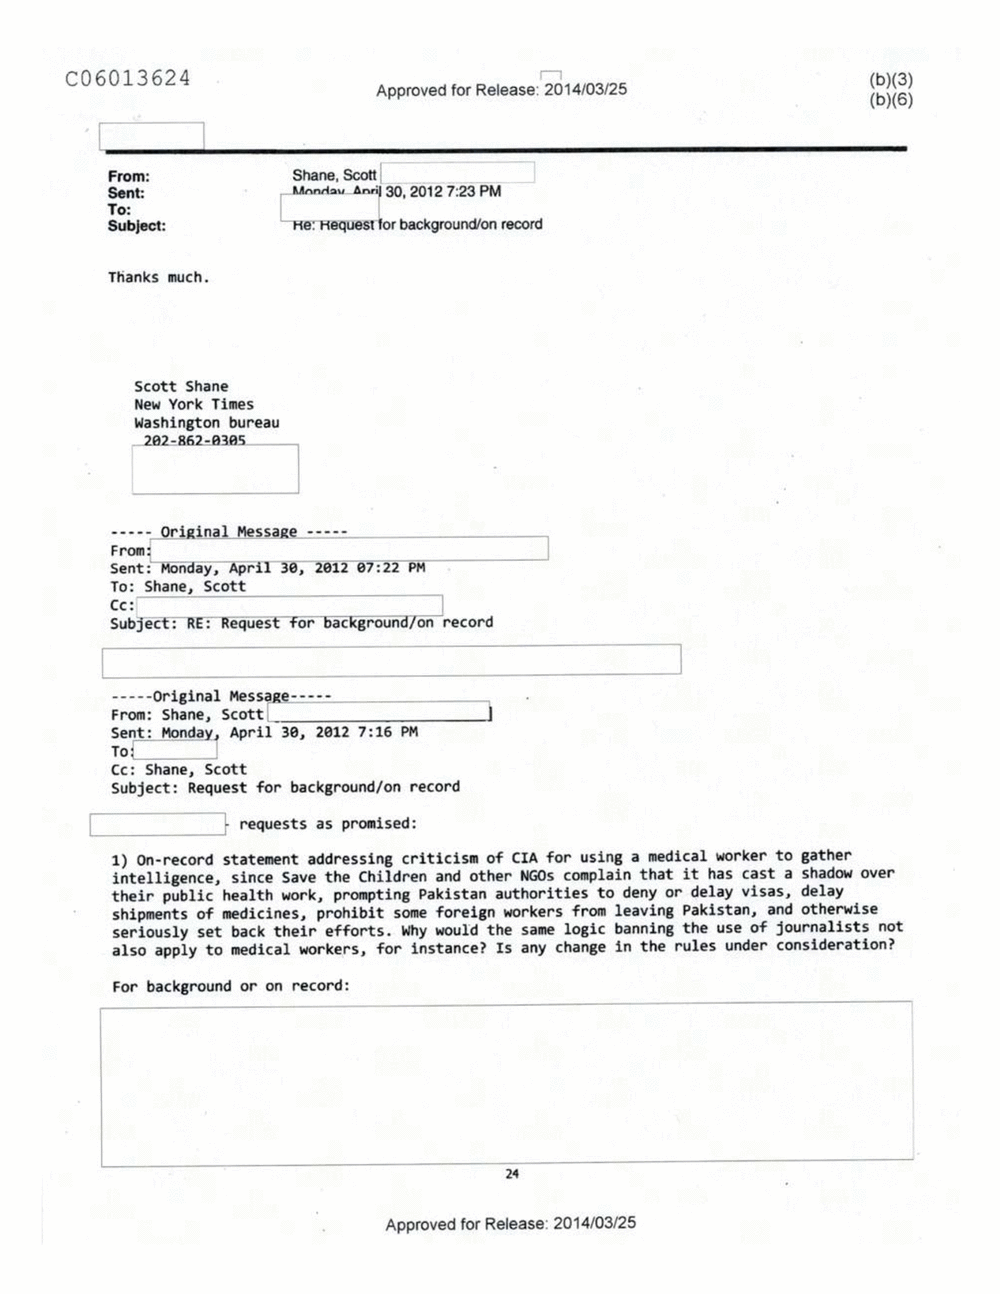 Page 458 from Email Correspondence Between Reporters and CIA Flacks